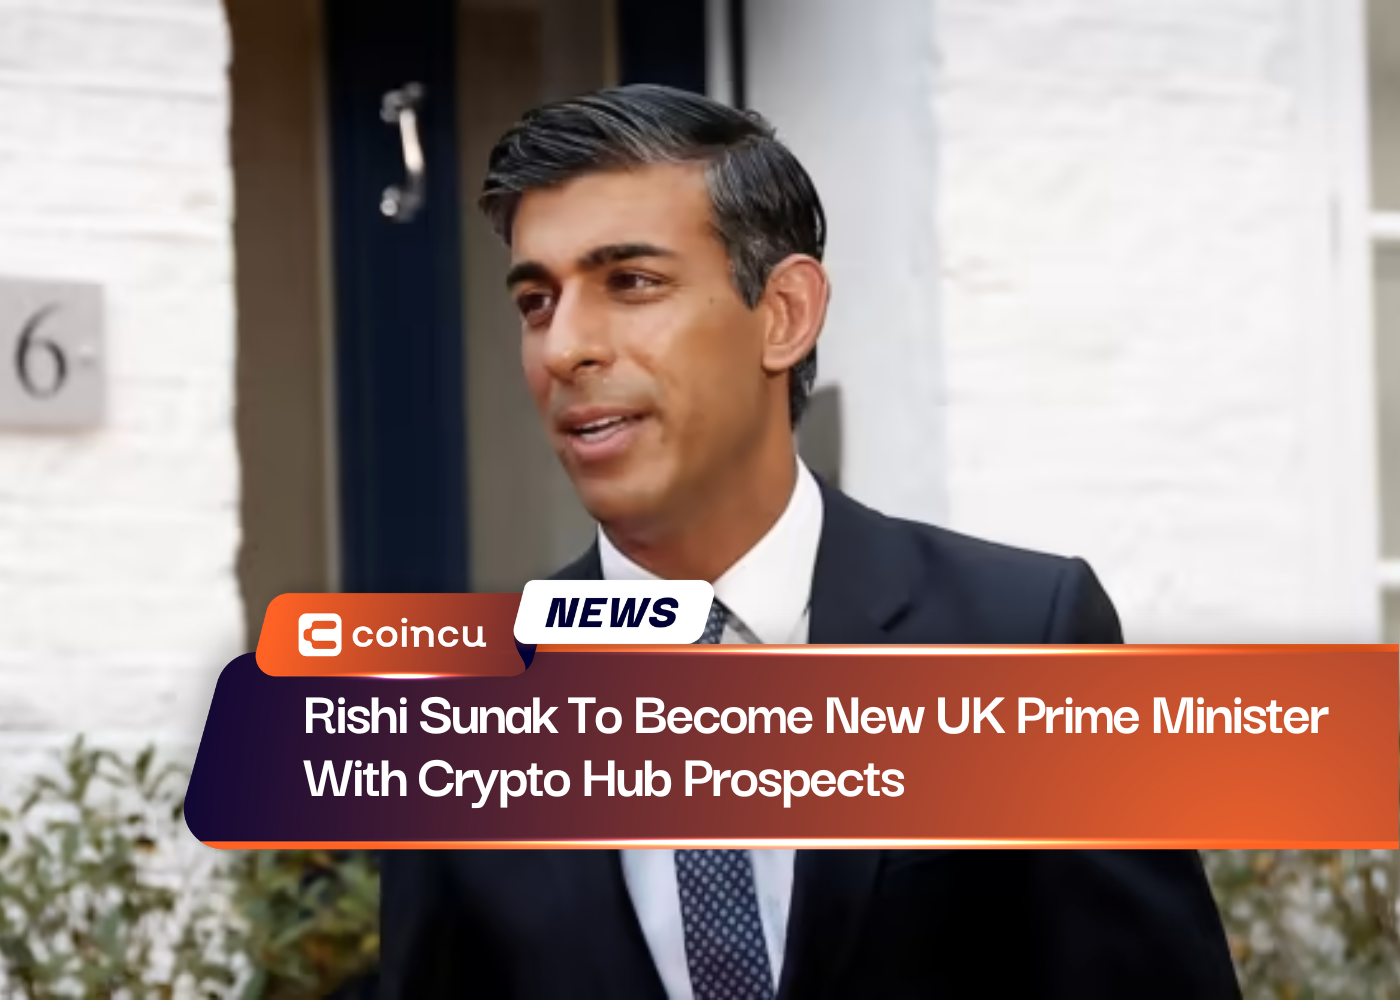 Rishi Sunak To Become New UK Prime Minister With Crypto Hub Prospects